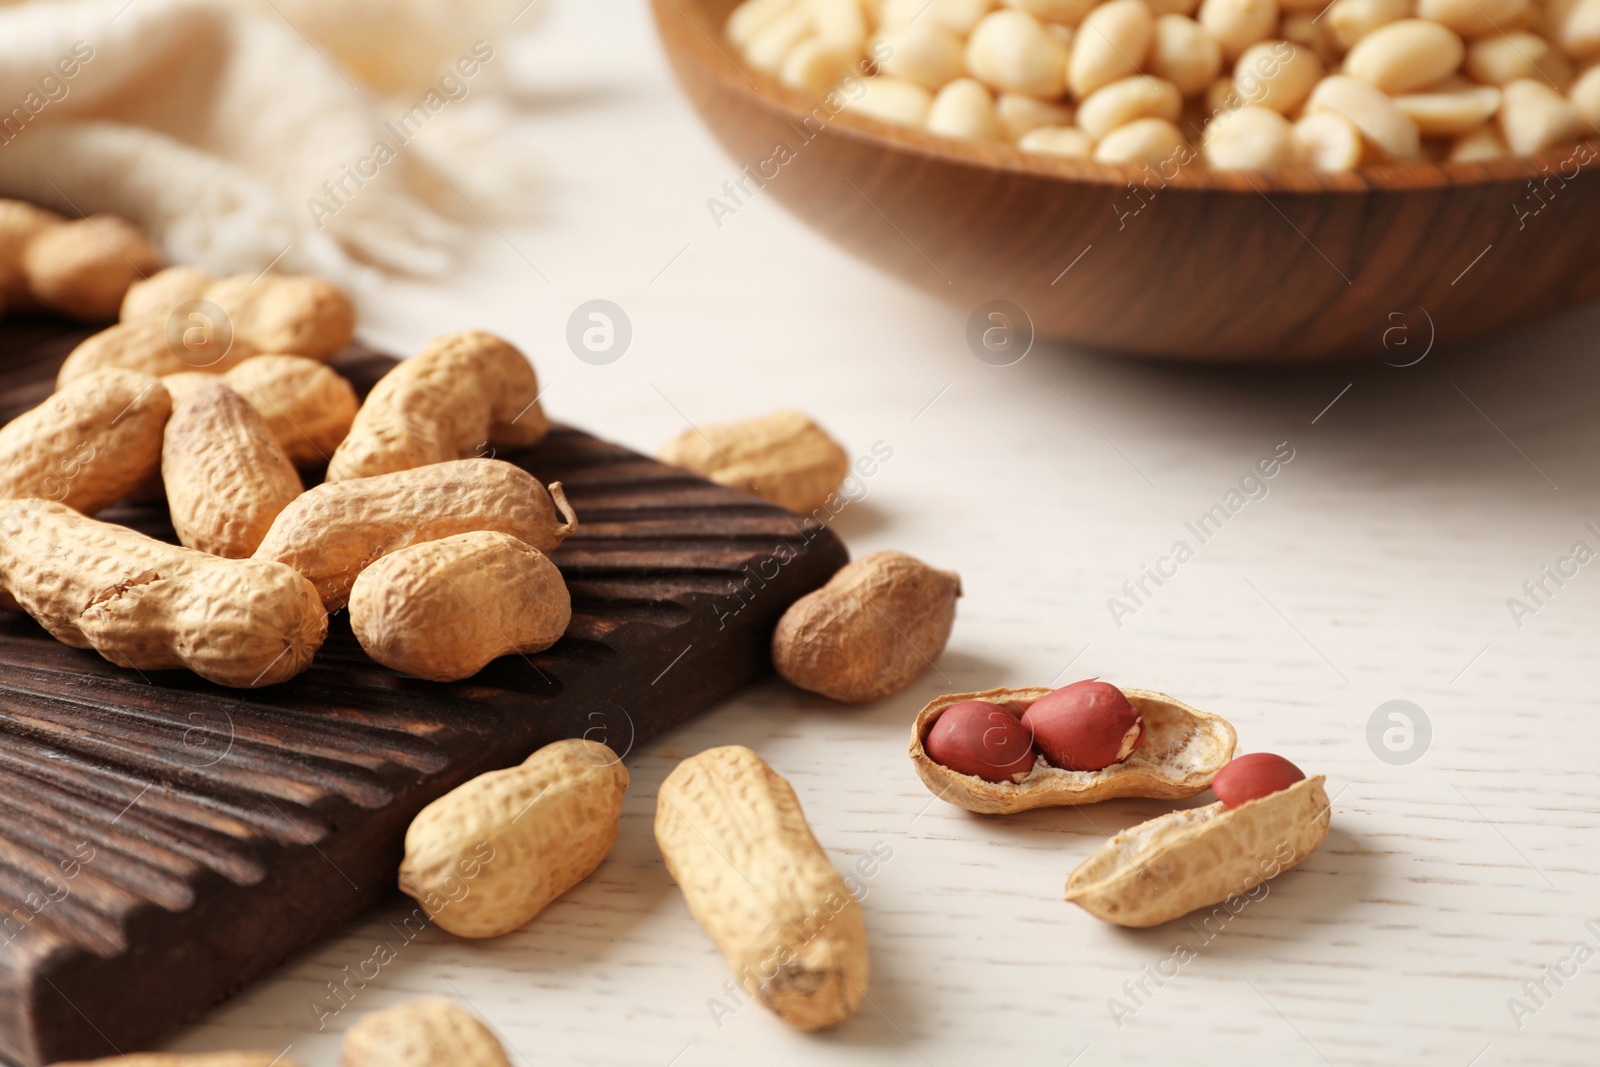 Photo of Raw peanuts in shell and board on table